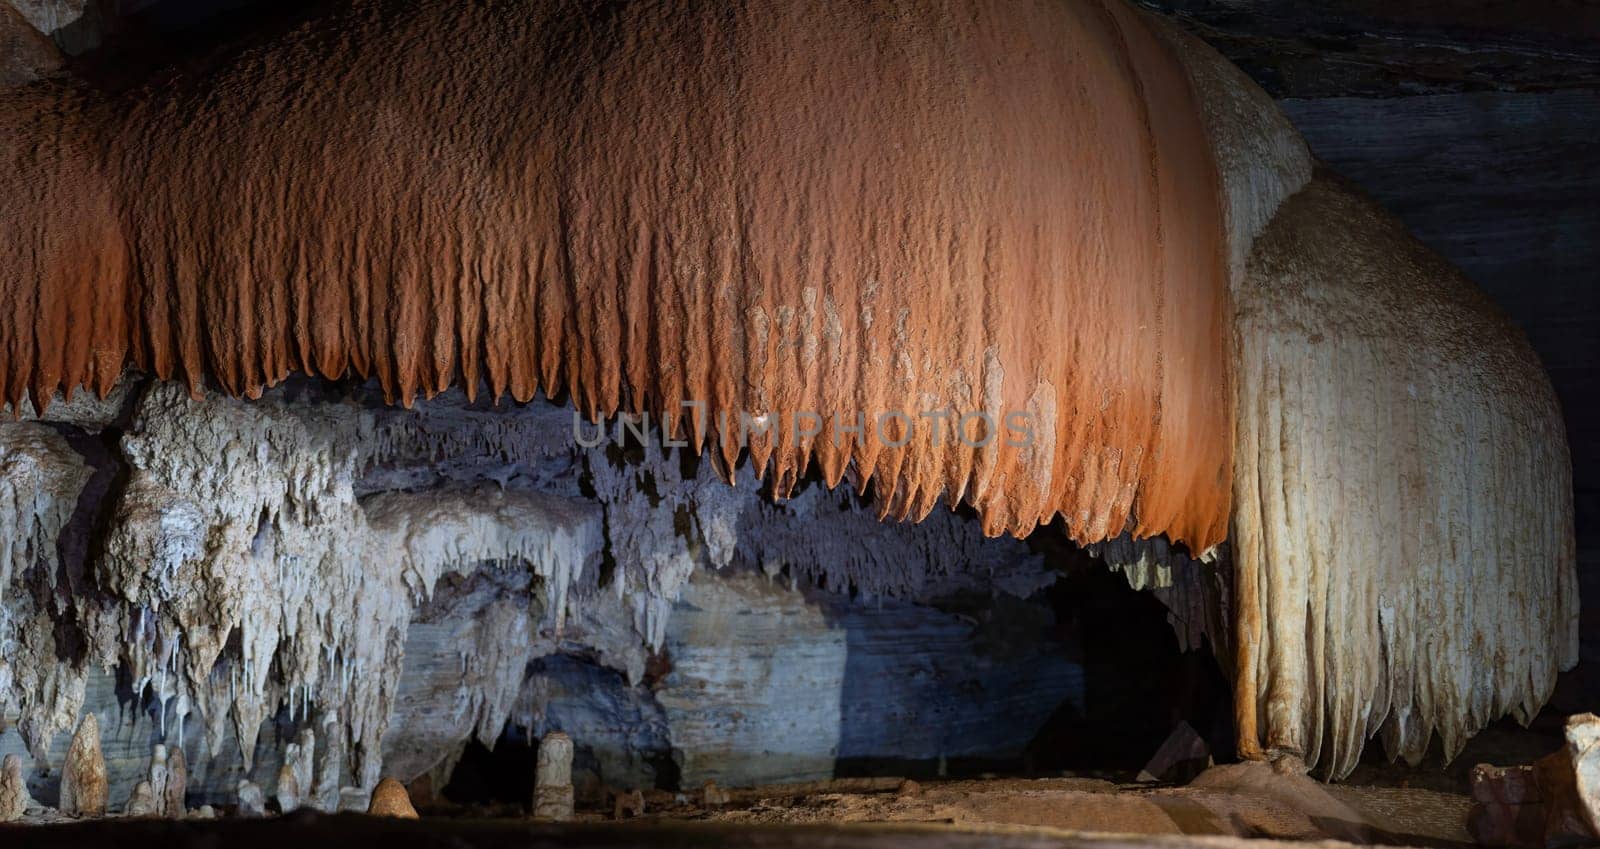 "Luminous cave formations display stunning geological wonders."